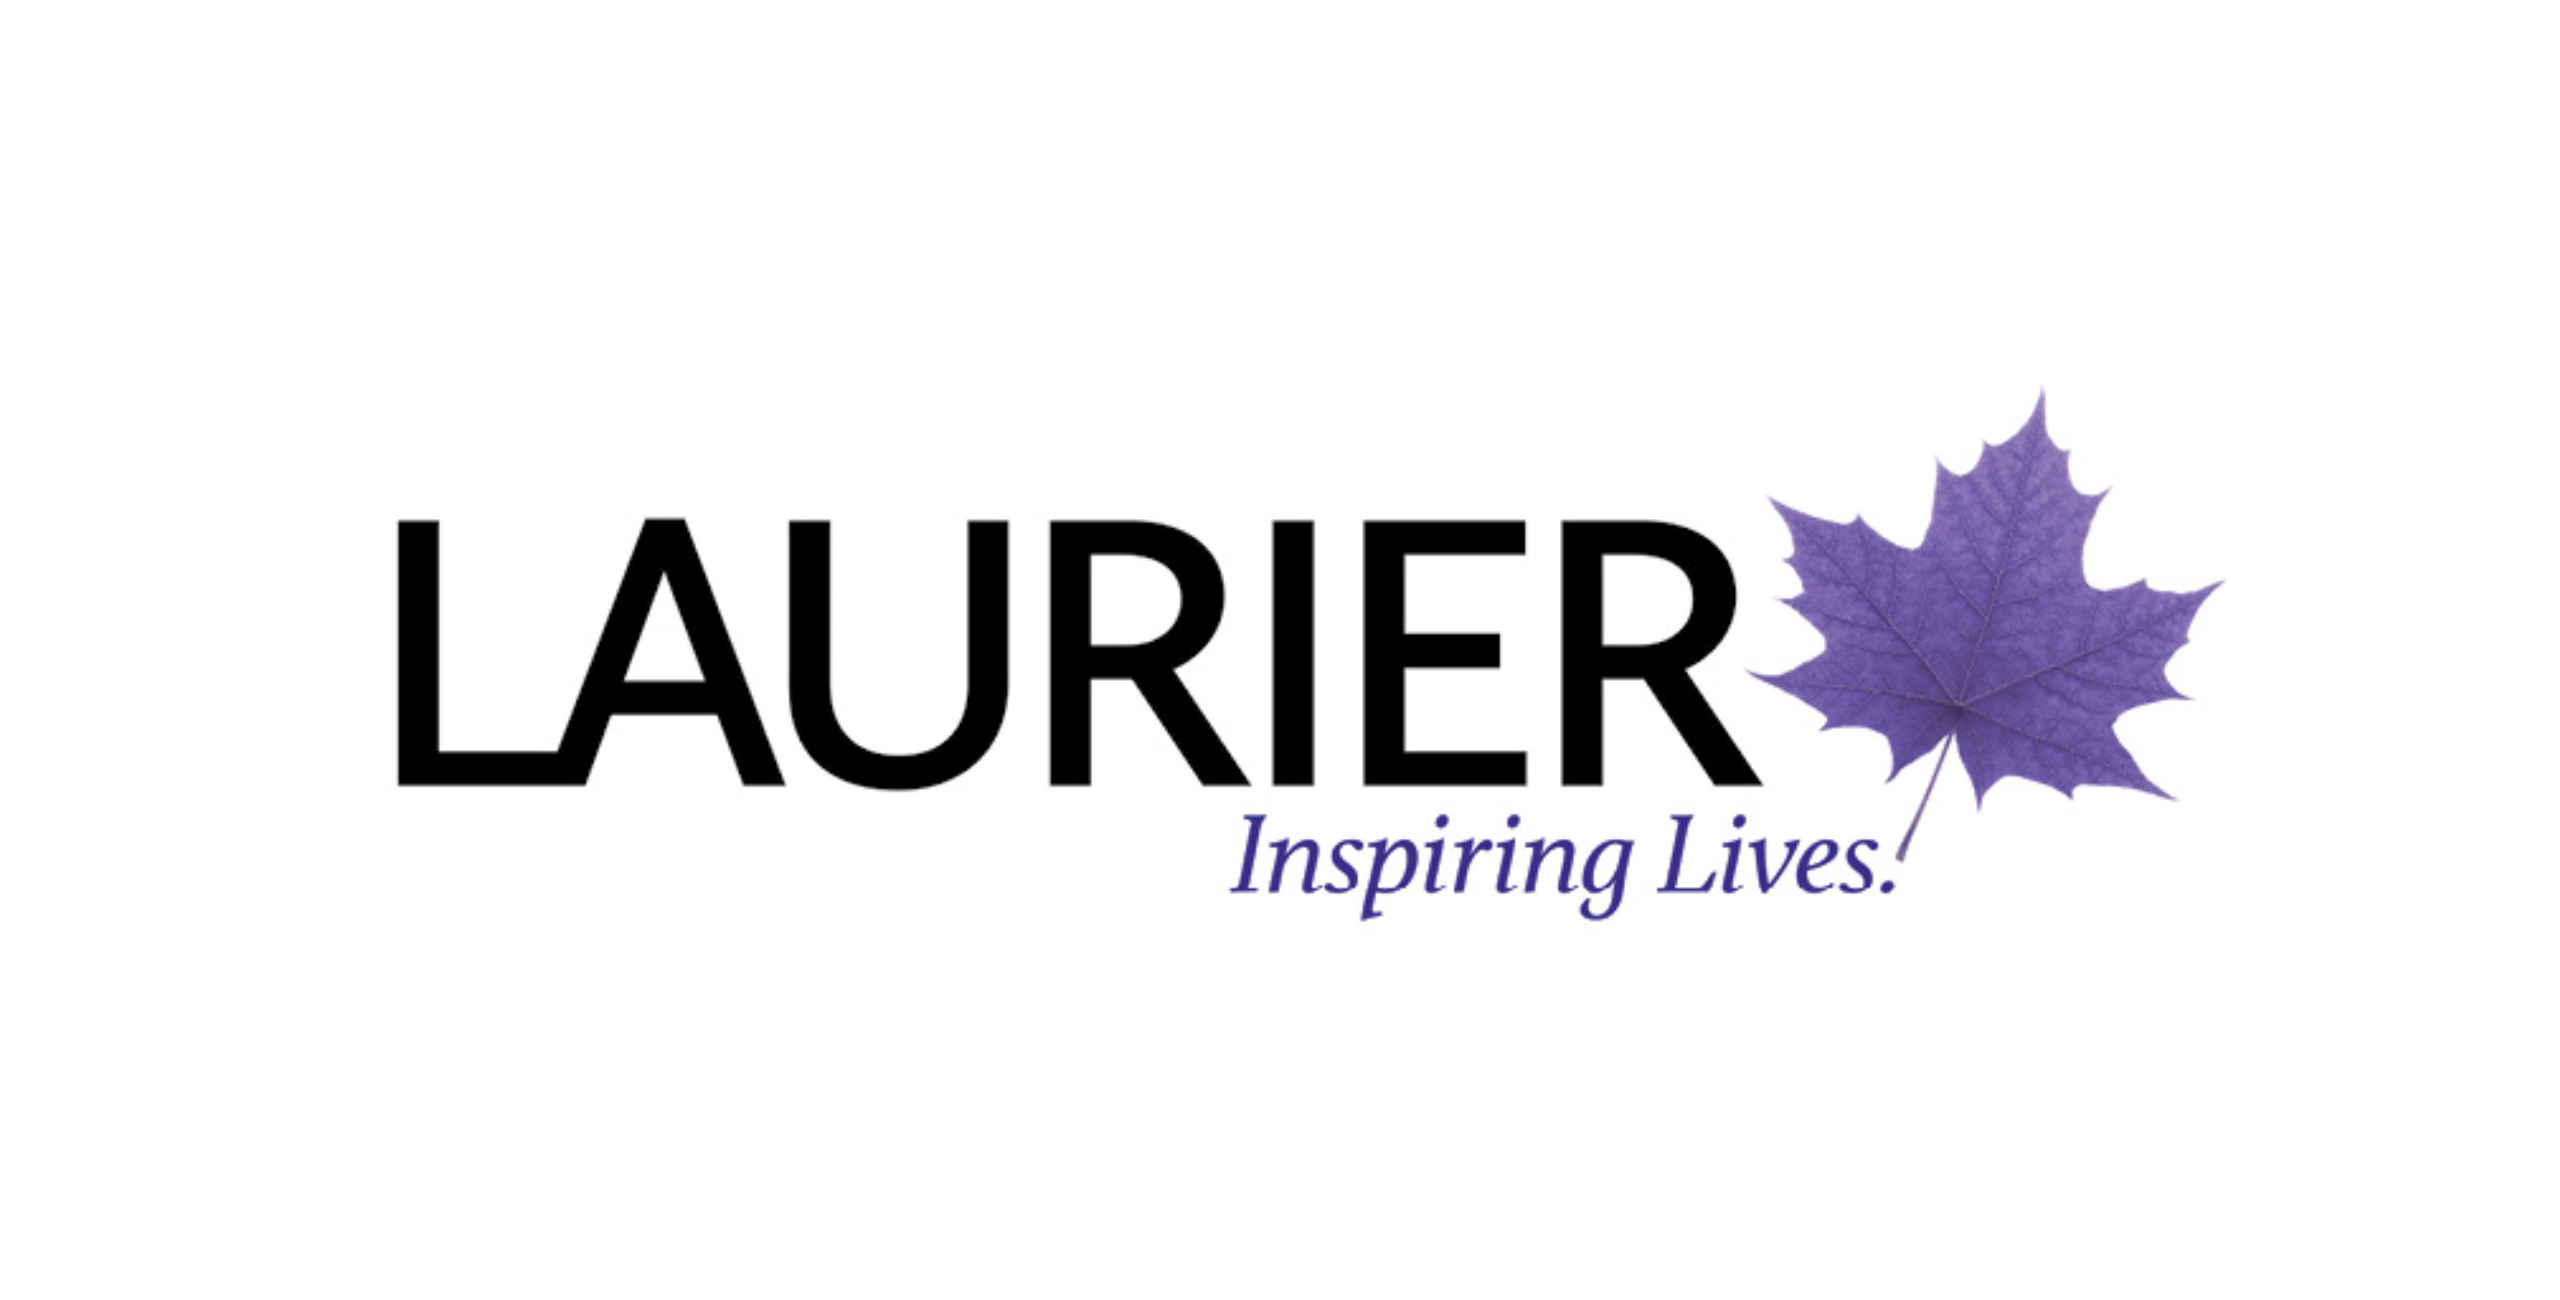 Showcase Image for Laurier Career Centre - Support booth for Laurier students/alumni